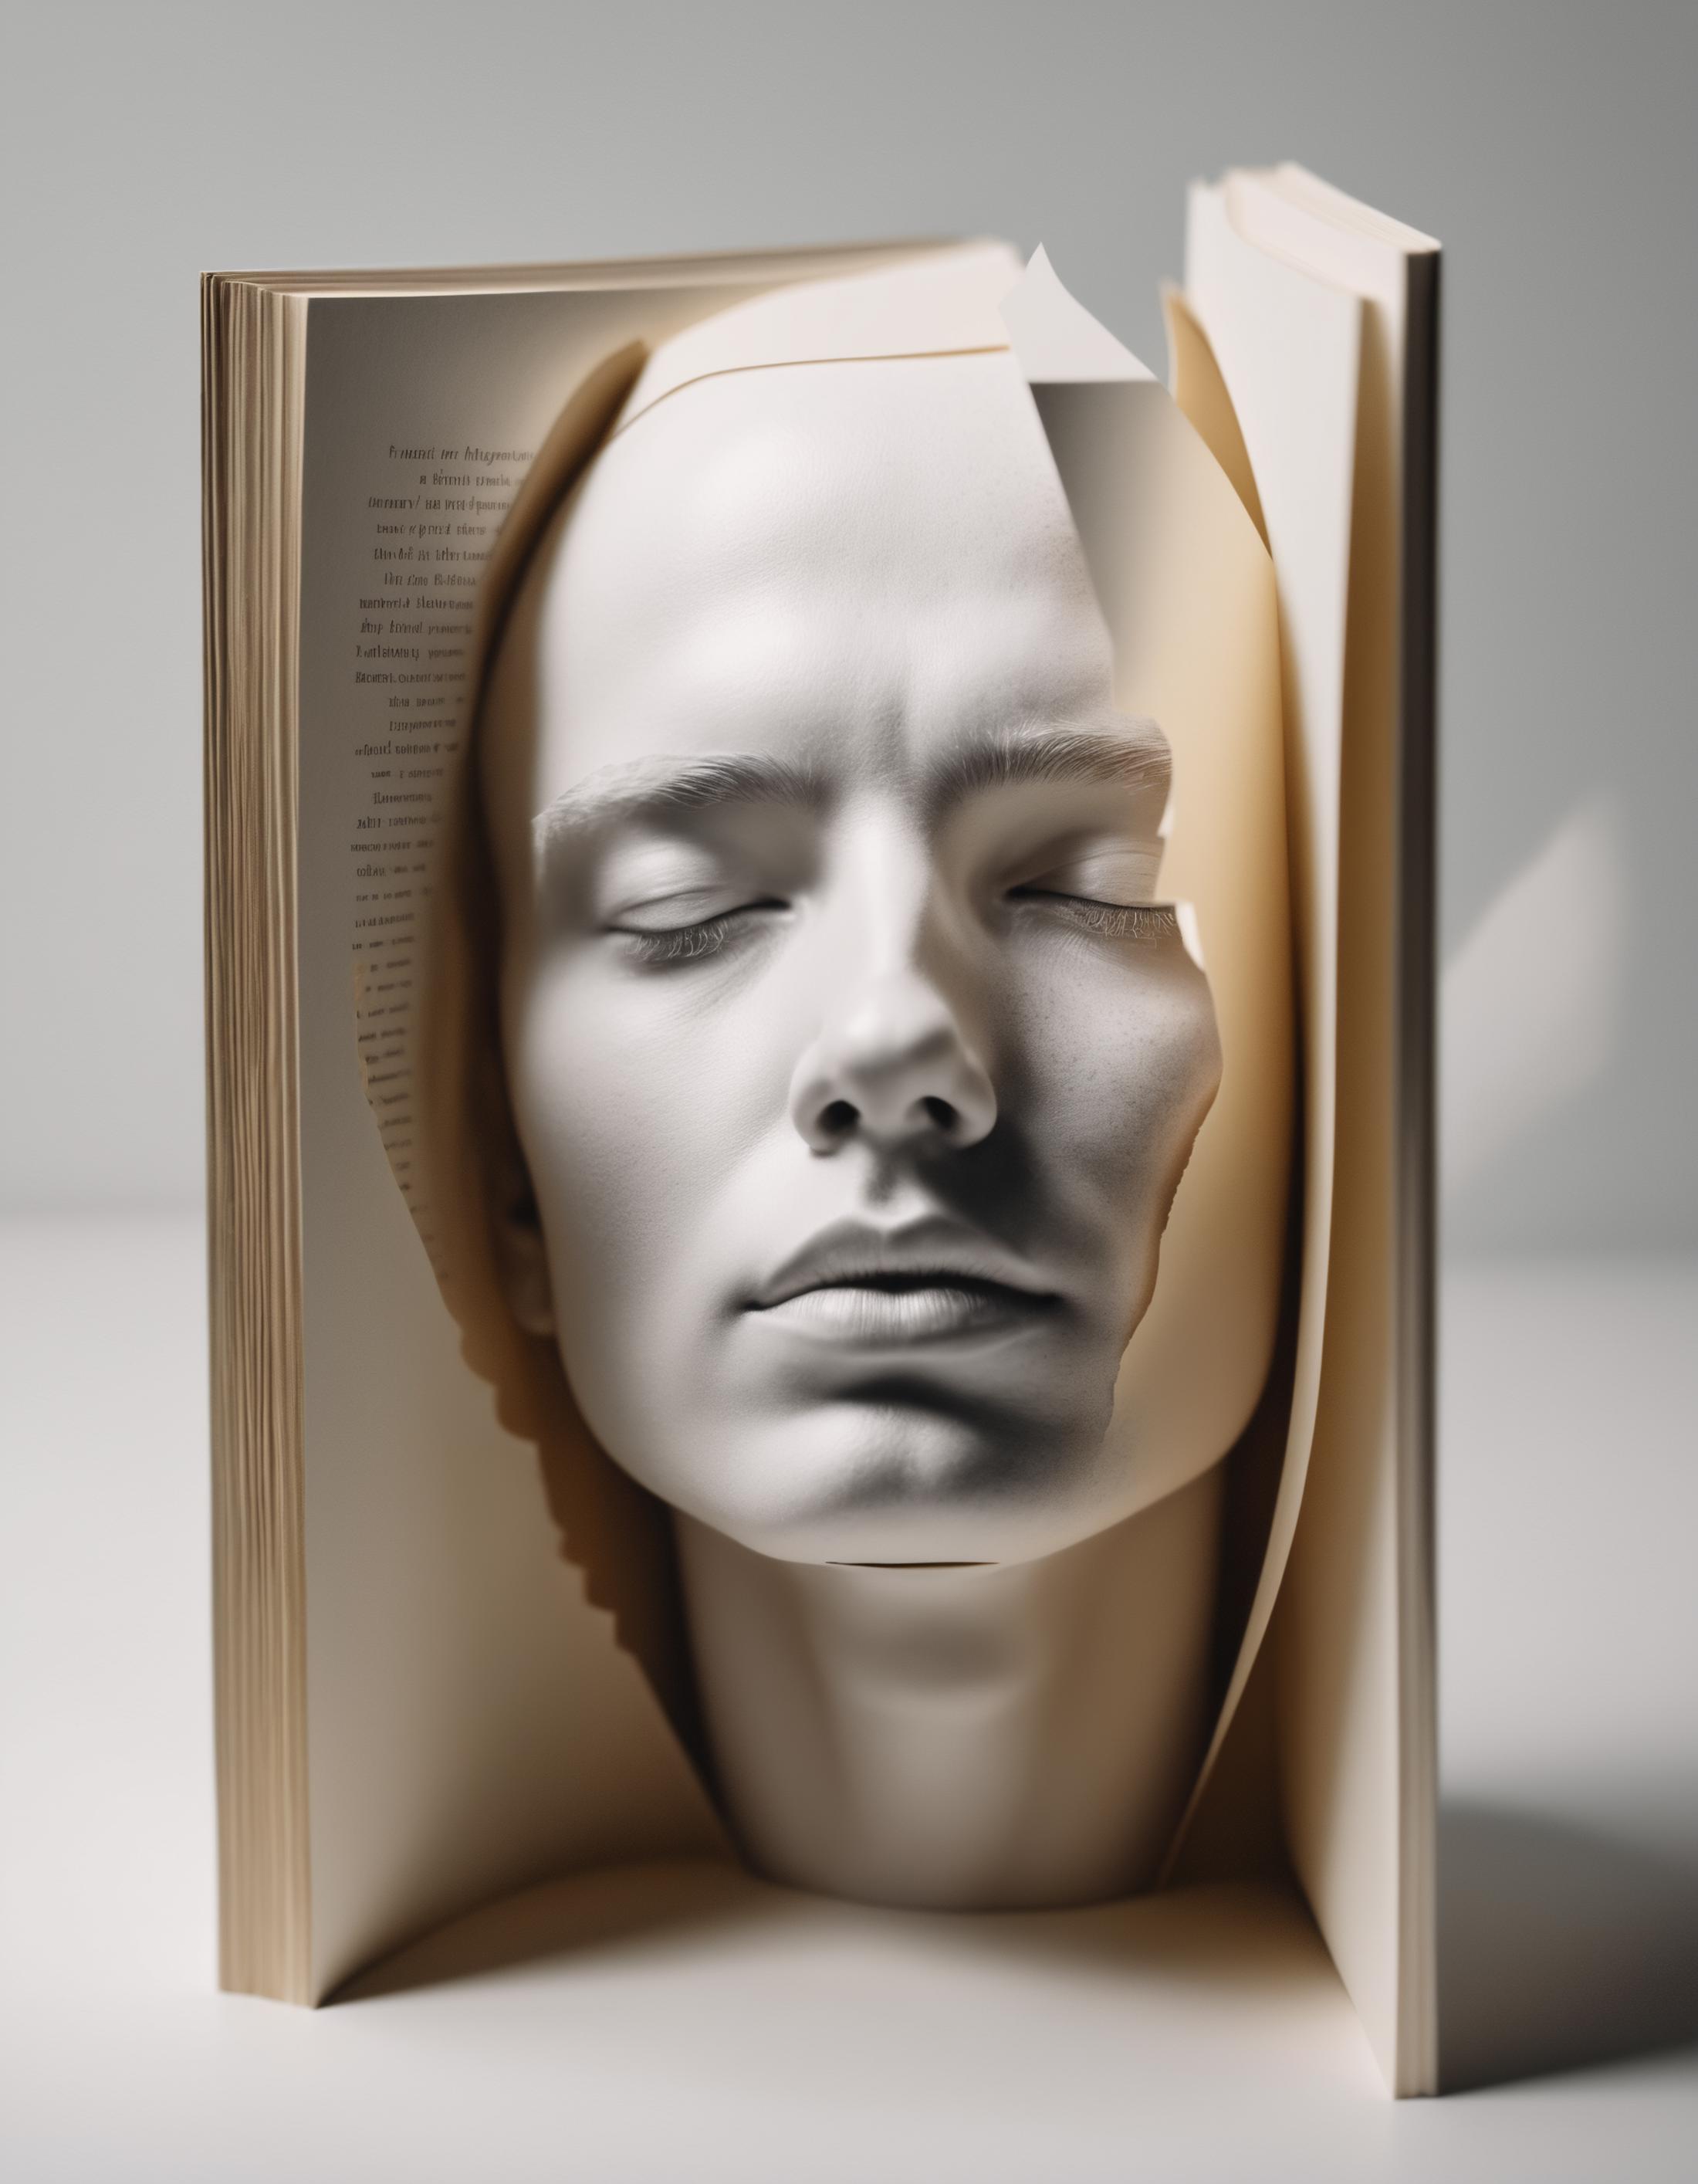 A book with a statue of a head on it.